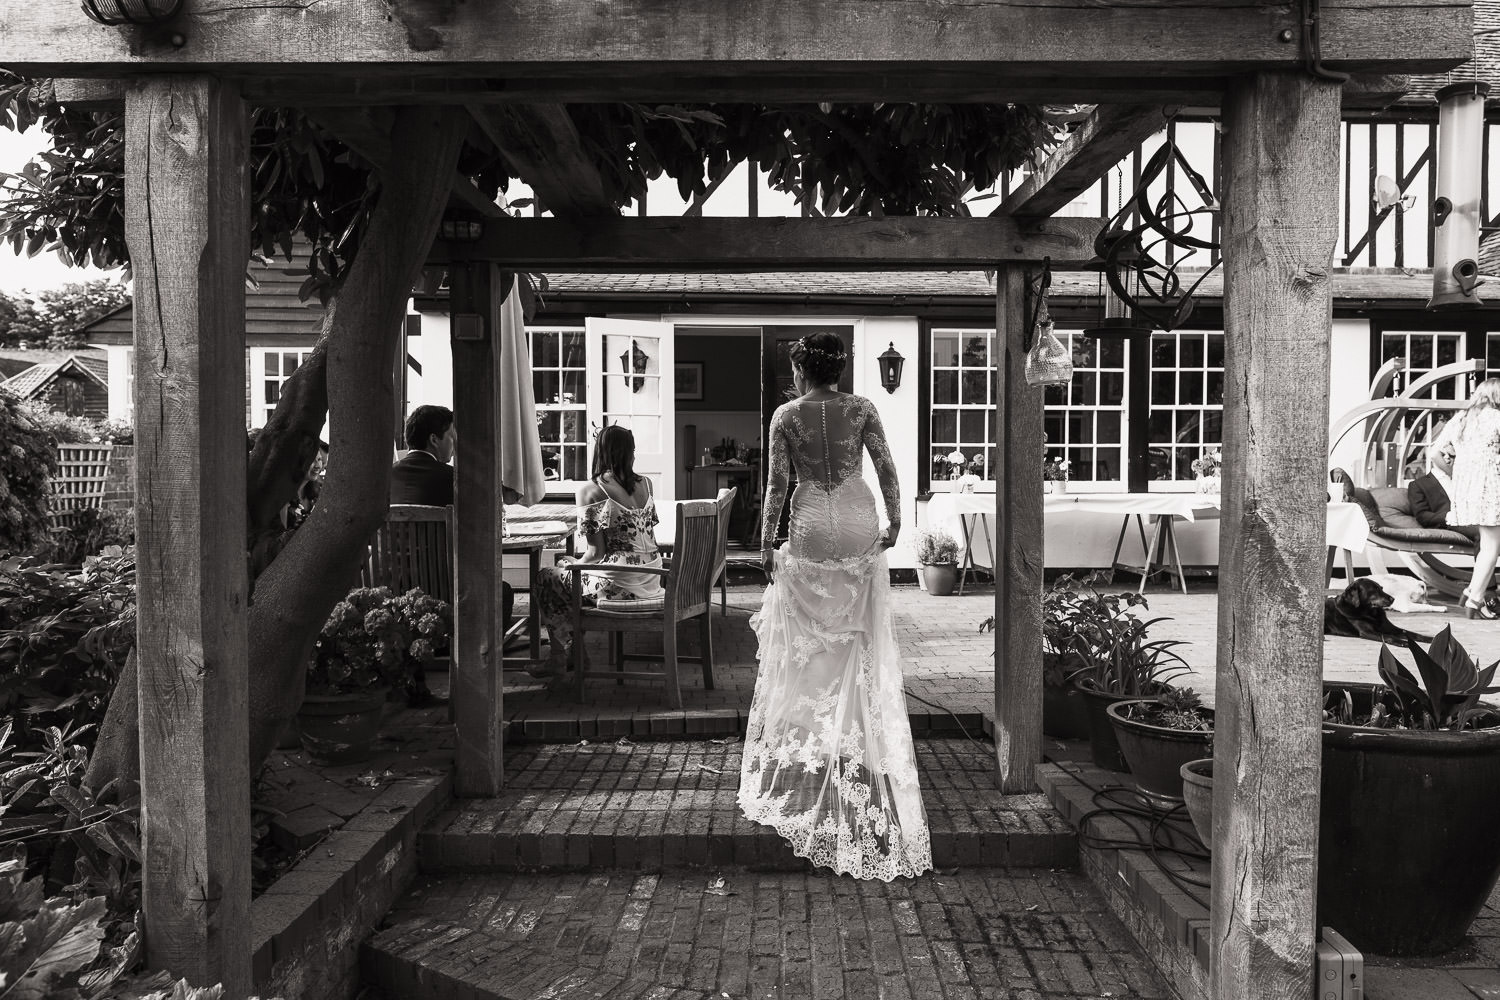 Woman in a wedding dress walking under a pergola towards the house.